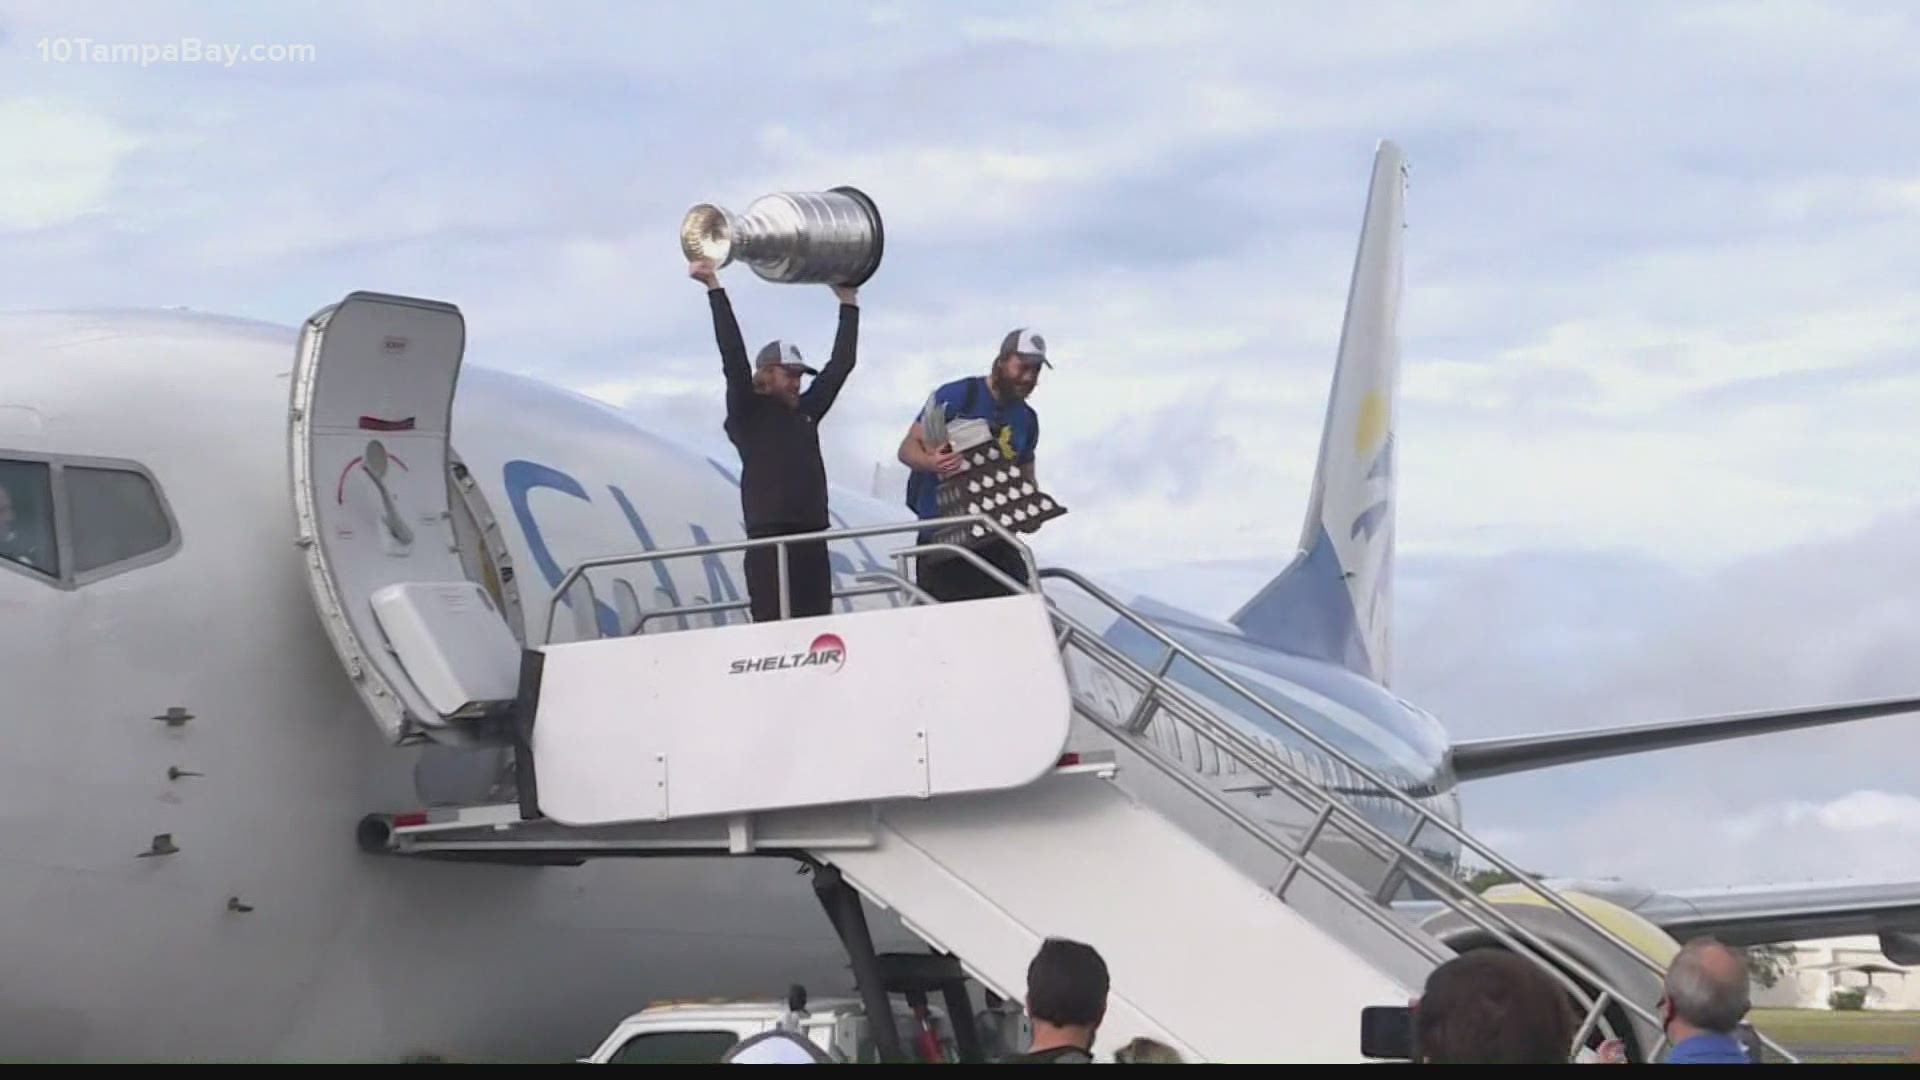 The reigning Stanley Cup champions have arrived back home after two months of isolation inside the NHL bubble.